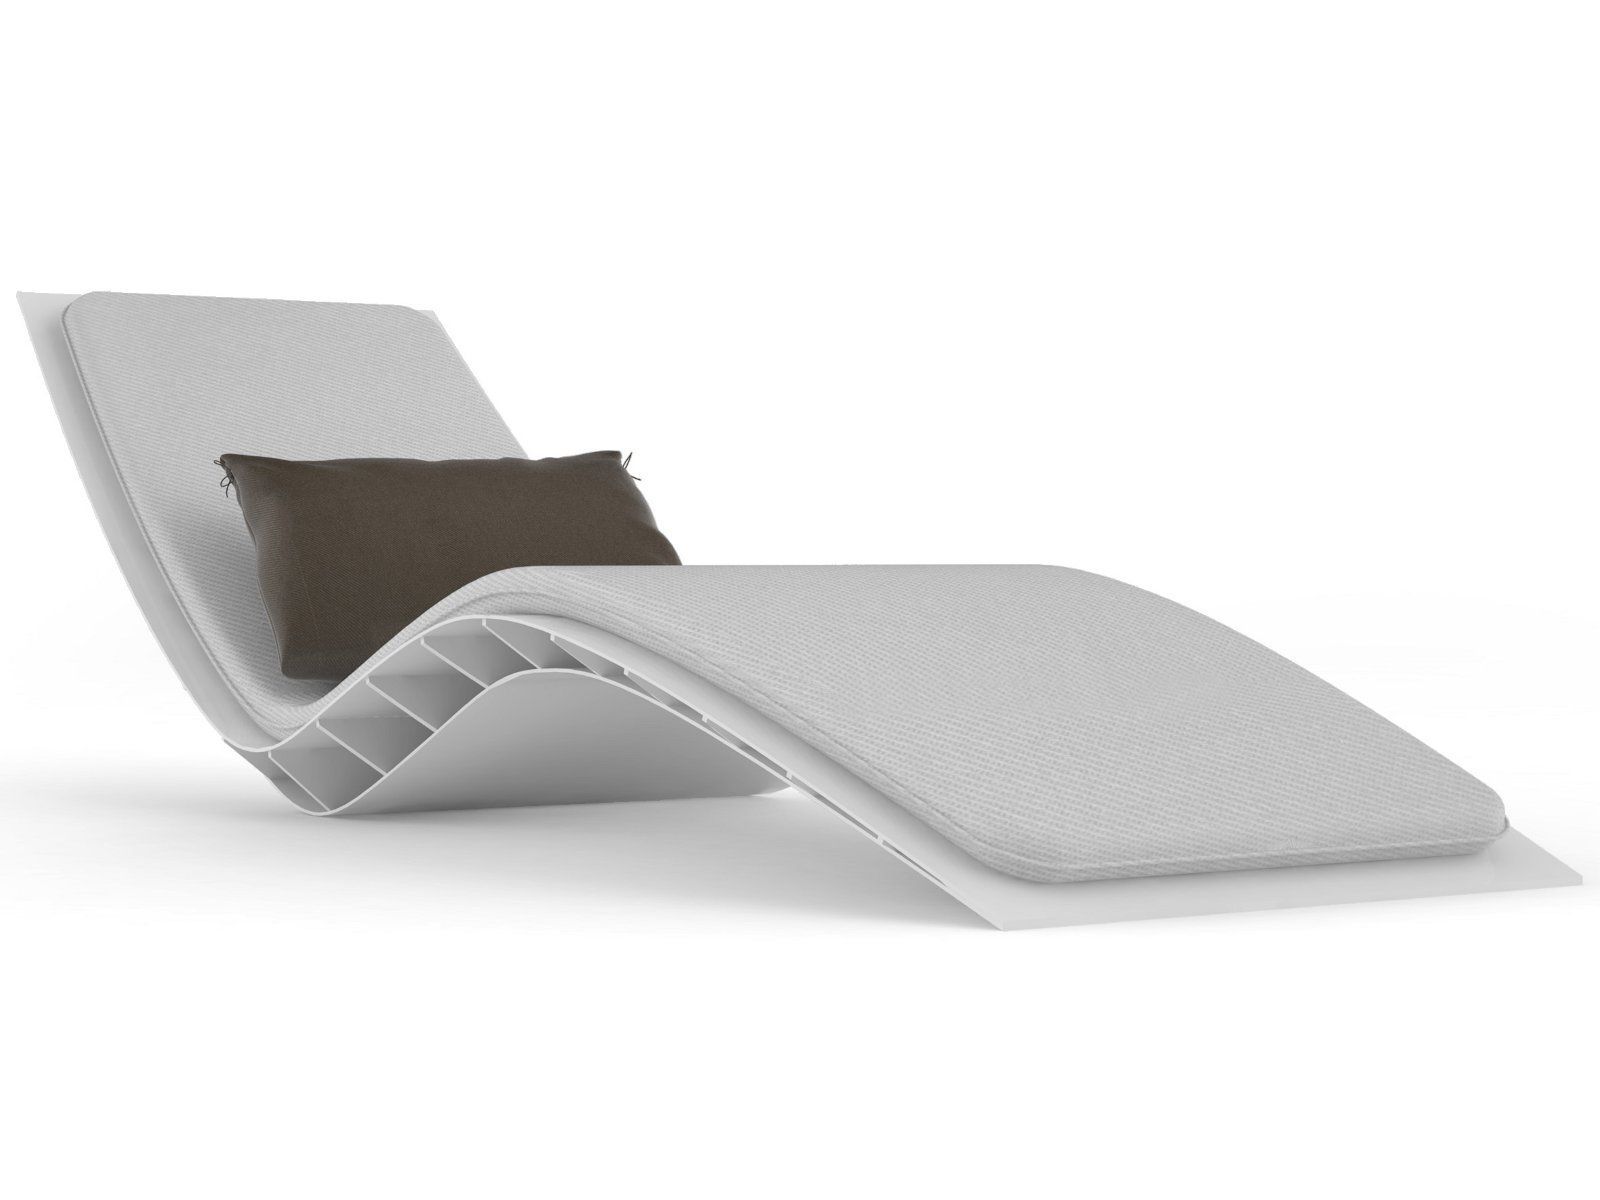 Current Awesome Modern Chaise Lounge Chair Cushions For Relaxing (View 10 of 15)